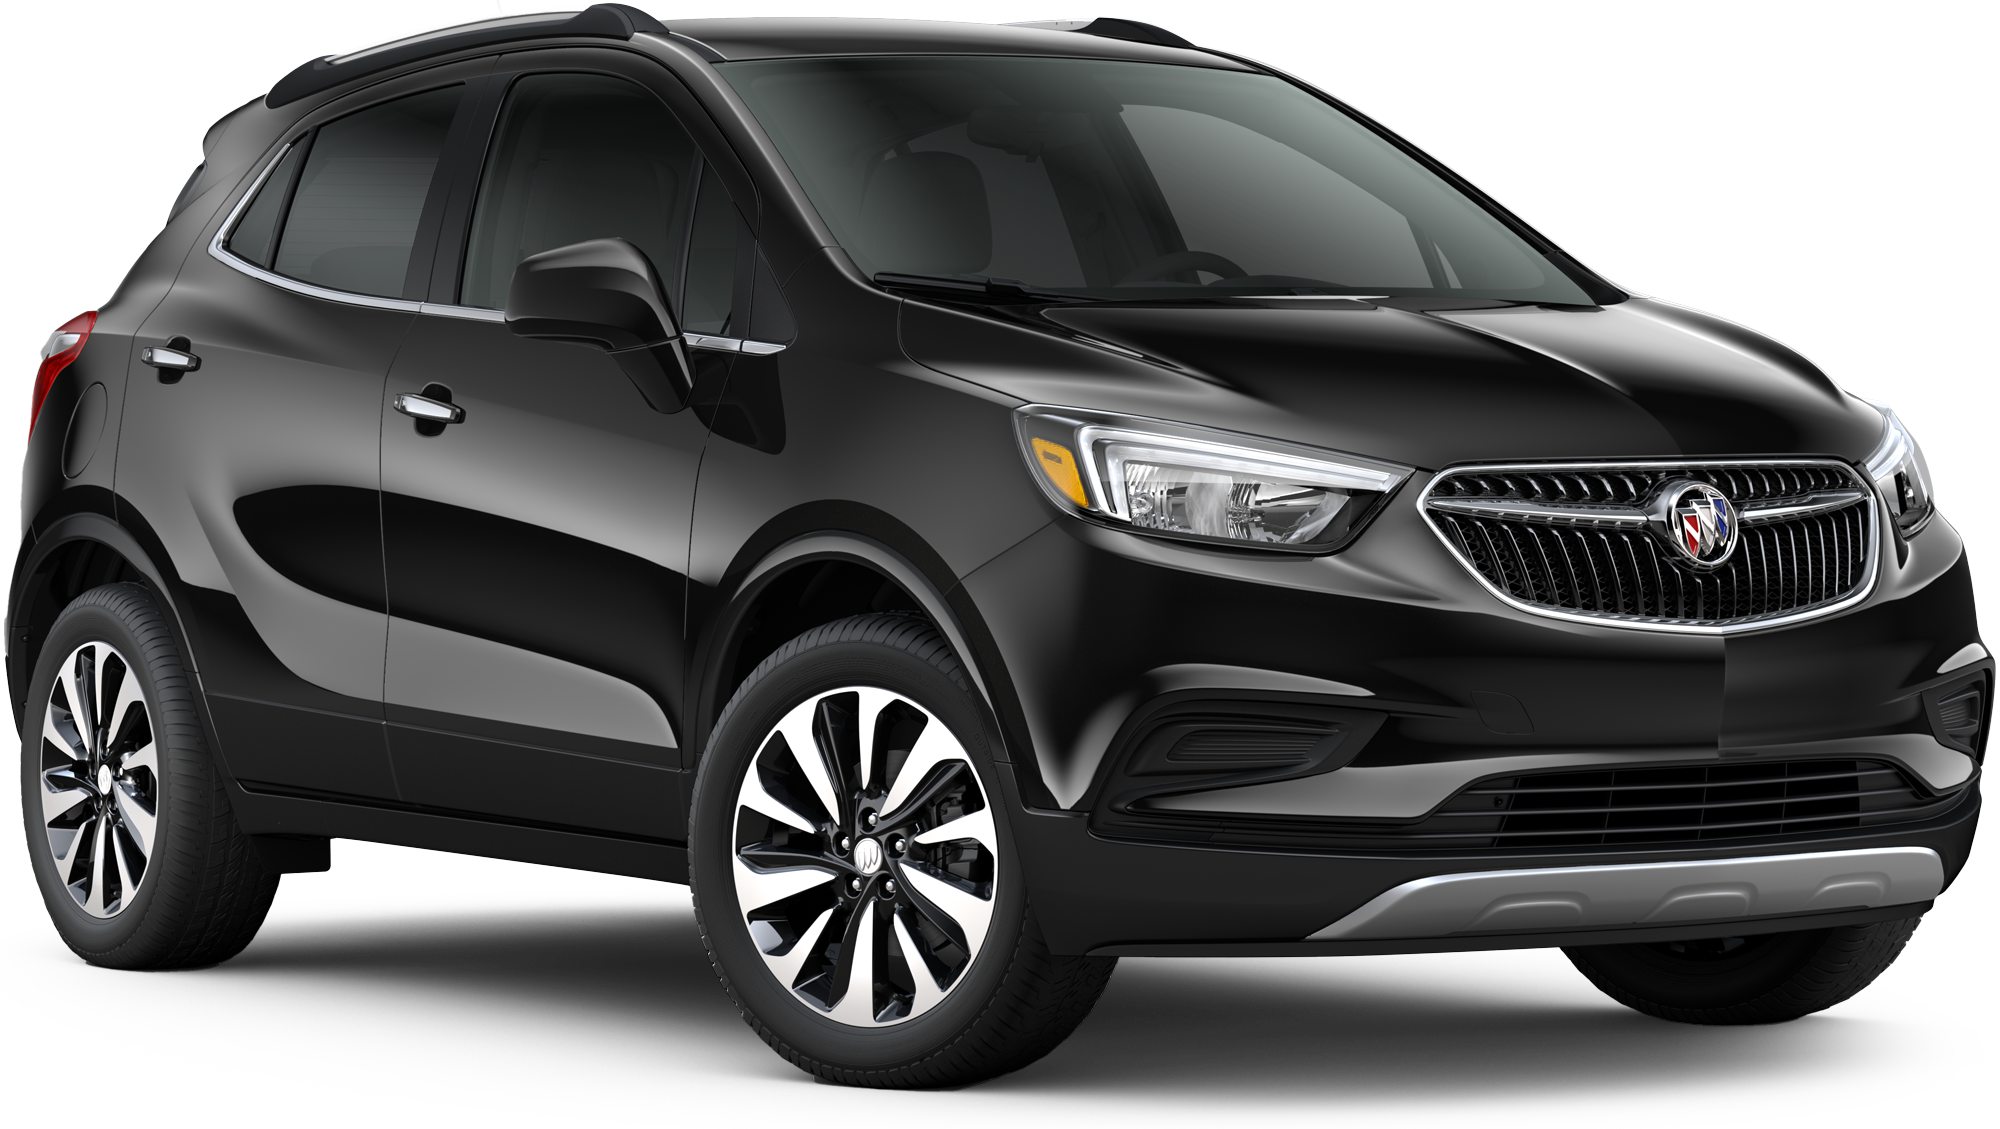 http://images.dealer.com/ddc/vehicles/2021/Buick/Encore/SUV/trim_Base_a8ea1b/perspective/front-right/2021_24.png